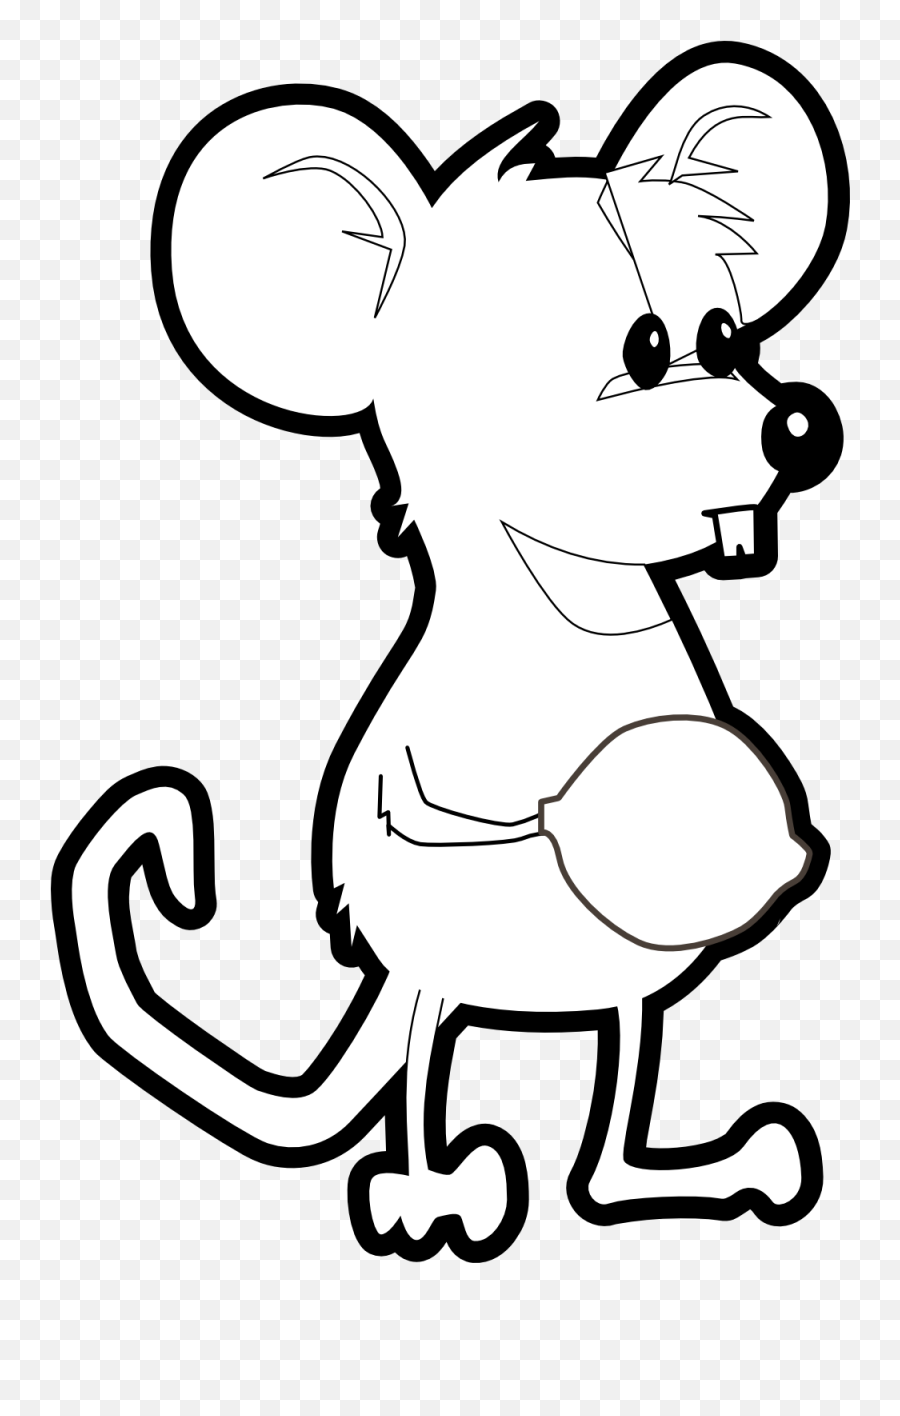 Legs Clipart Cartoon - Cartoon Rat Clipart Black And White Png,Cartoon Legs  Png - free transparent png images 